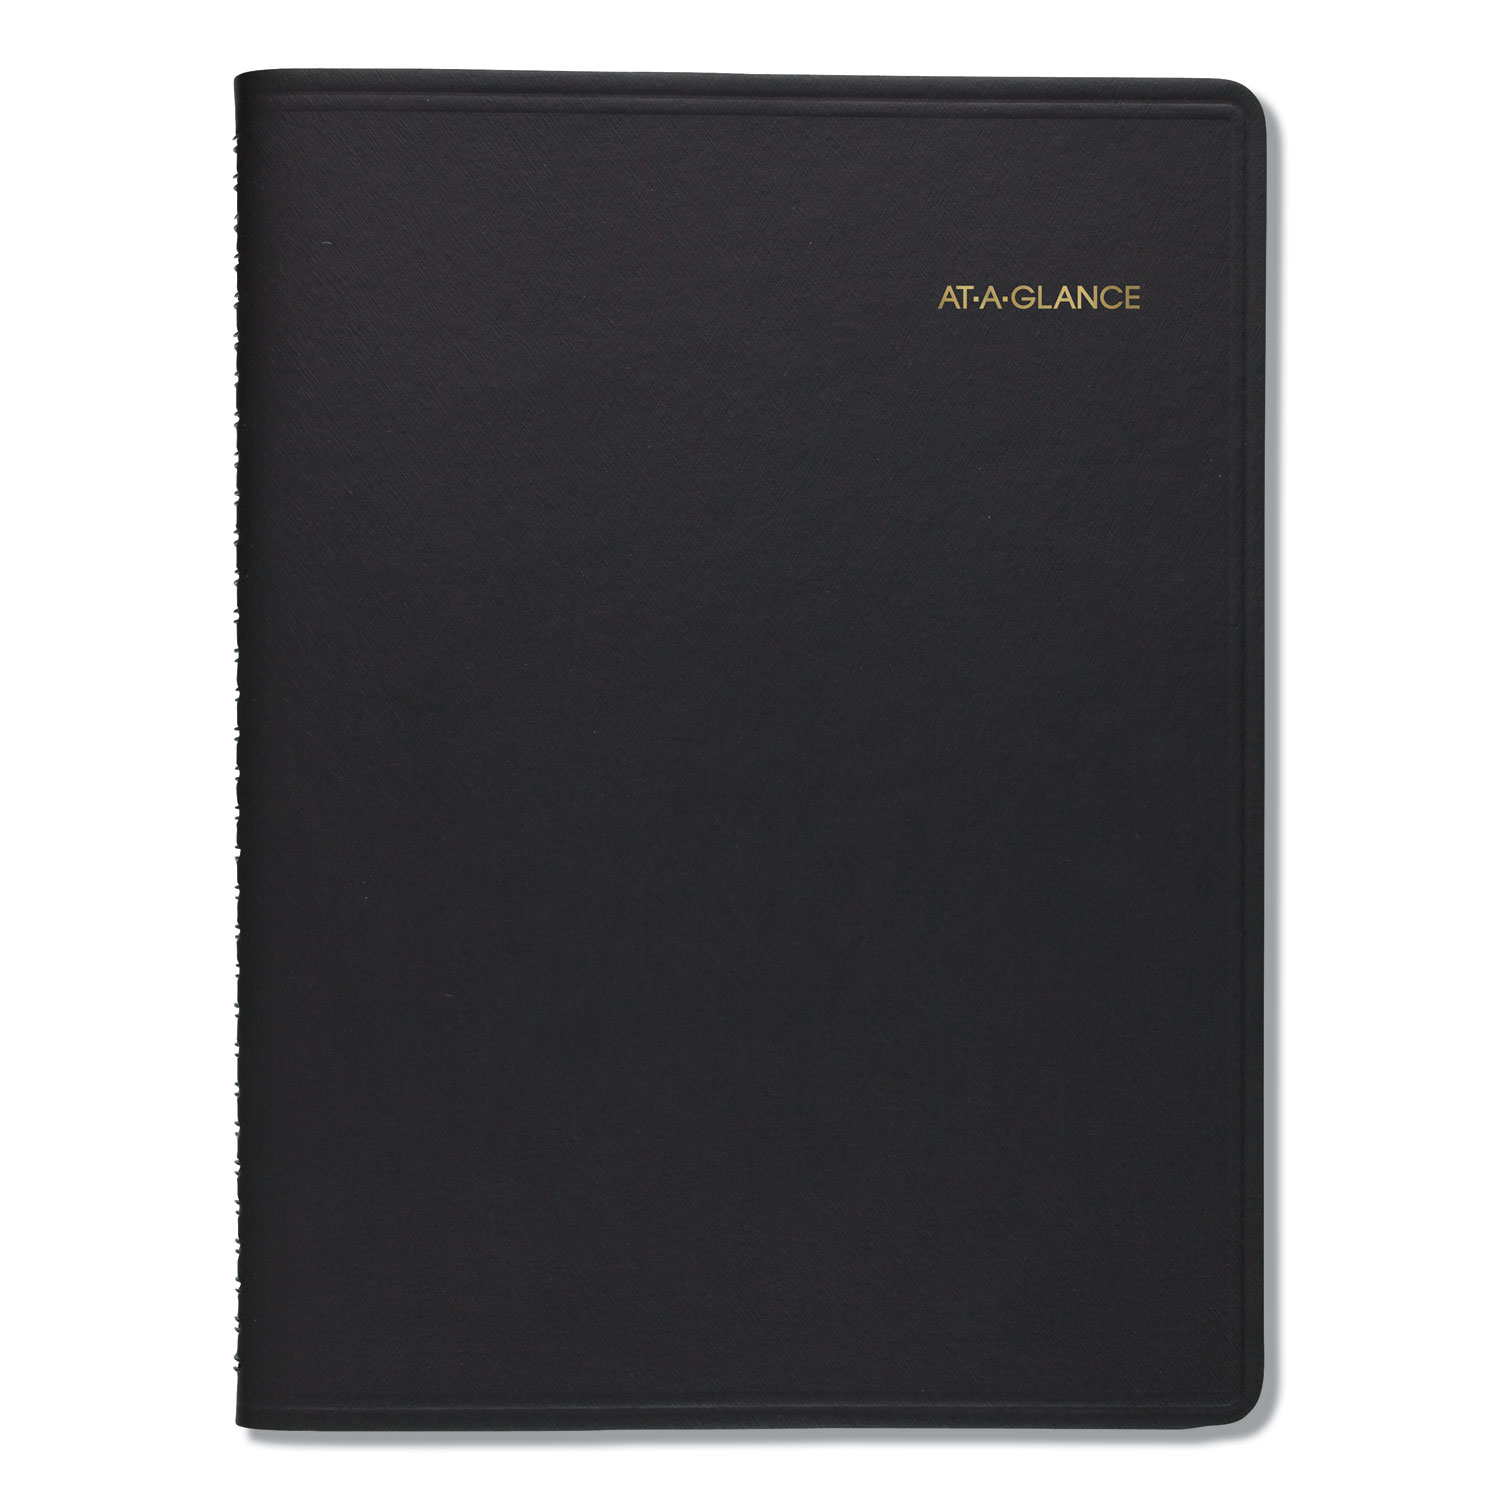 AT-A-GLANCE 2020 Monthly Planner Large 7026005 9 x 11 Black 2020 New Edition, 2-Pack 